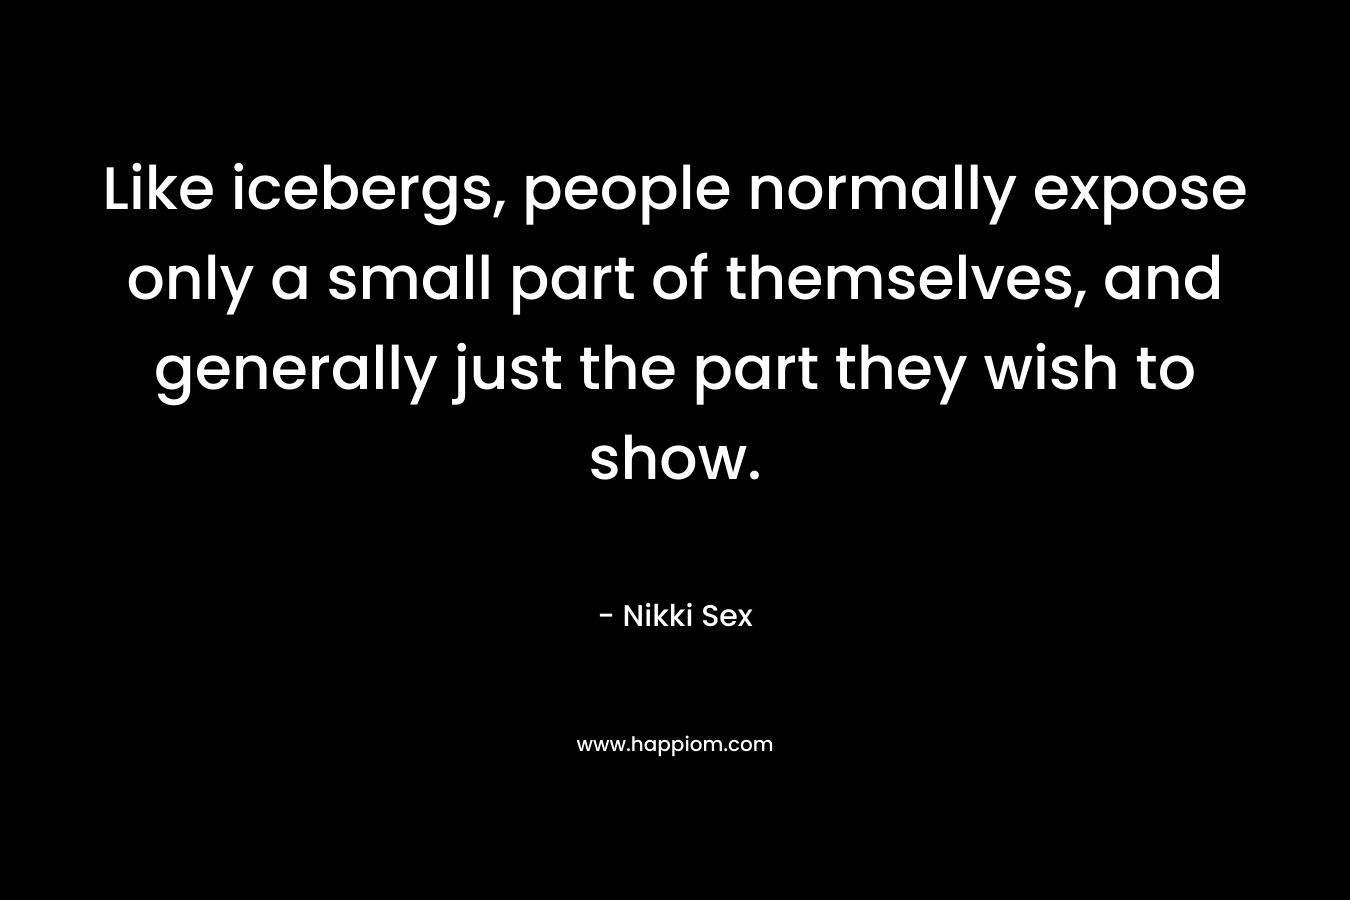 Like icebergs, people normally expose only a small part of themselves, and generally just the part they wish to show.